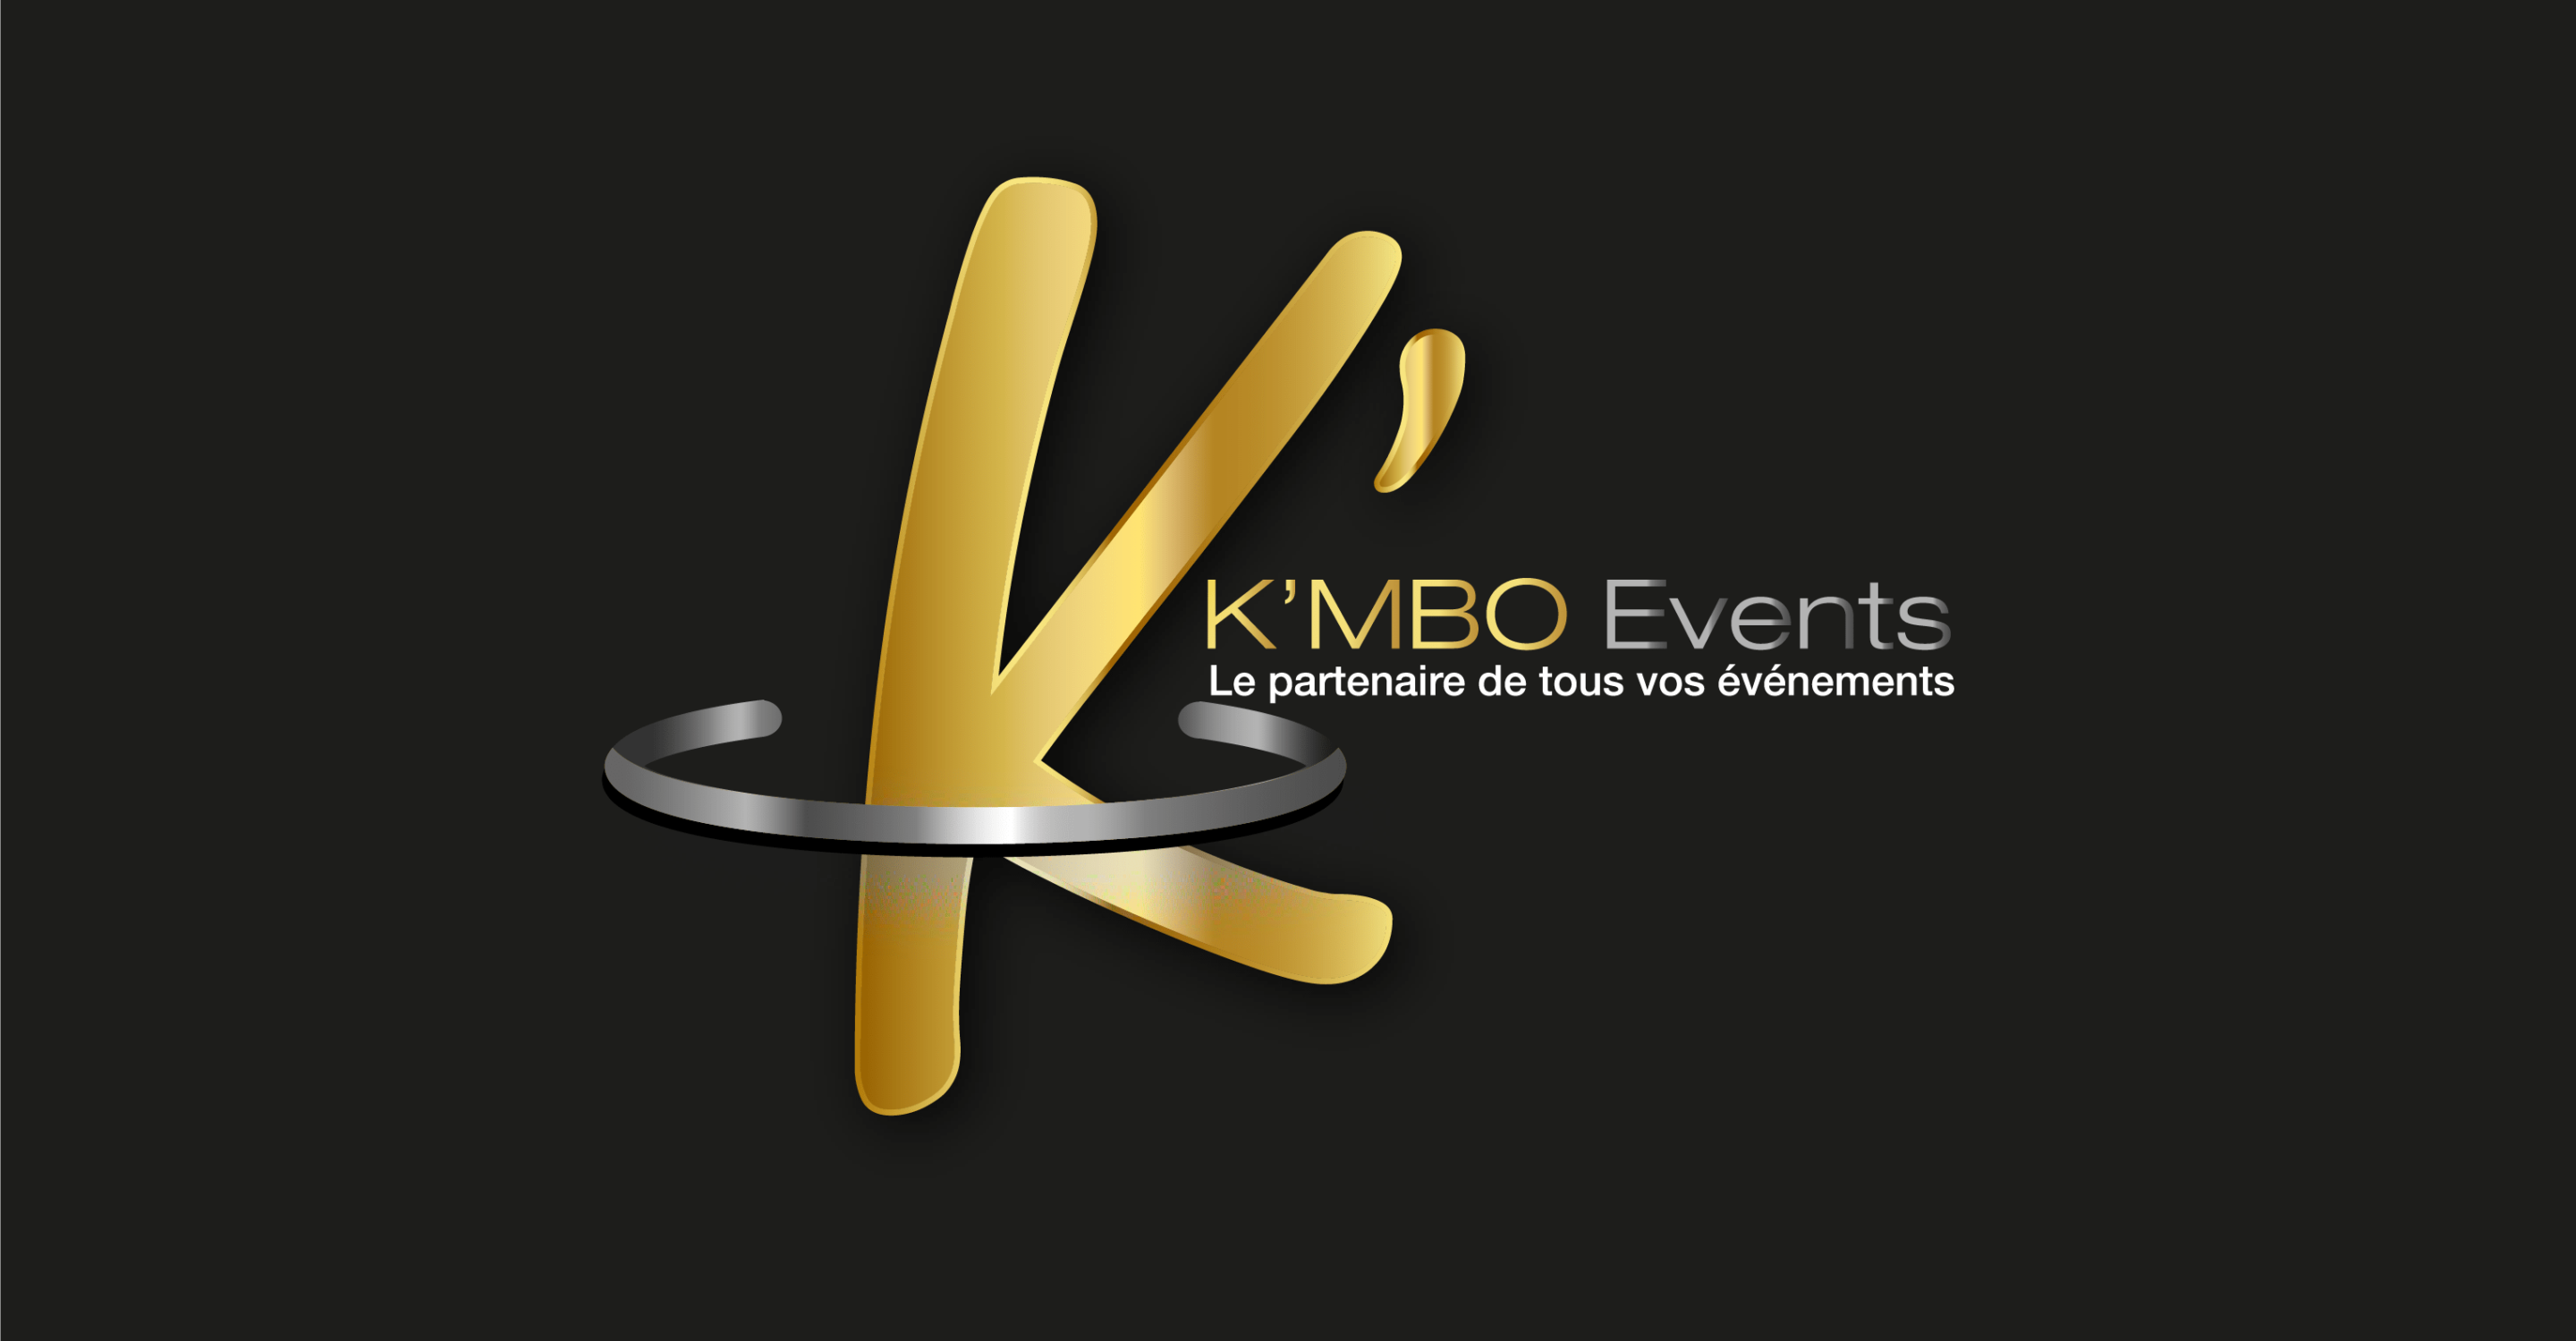 KMBO Events